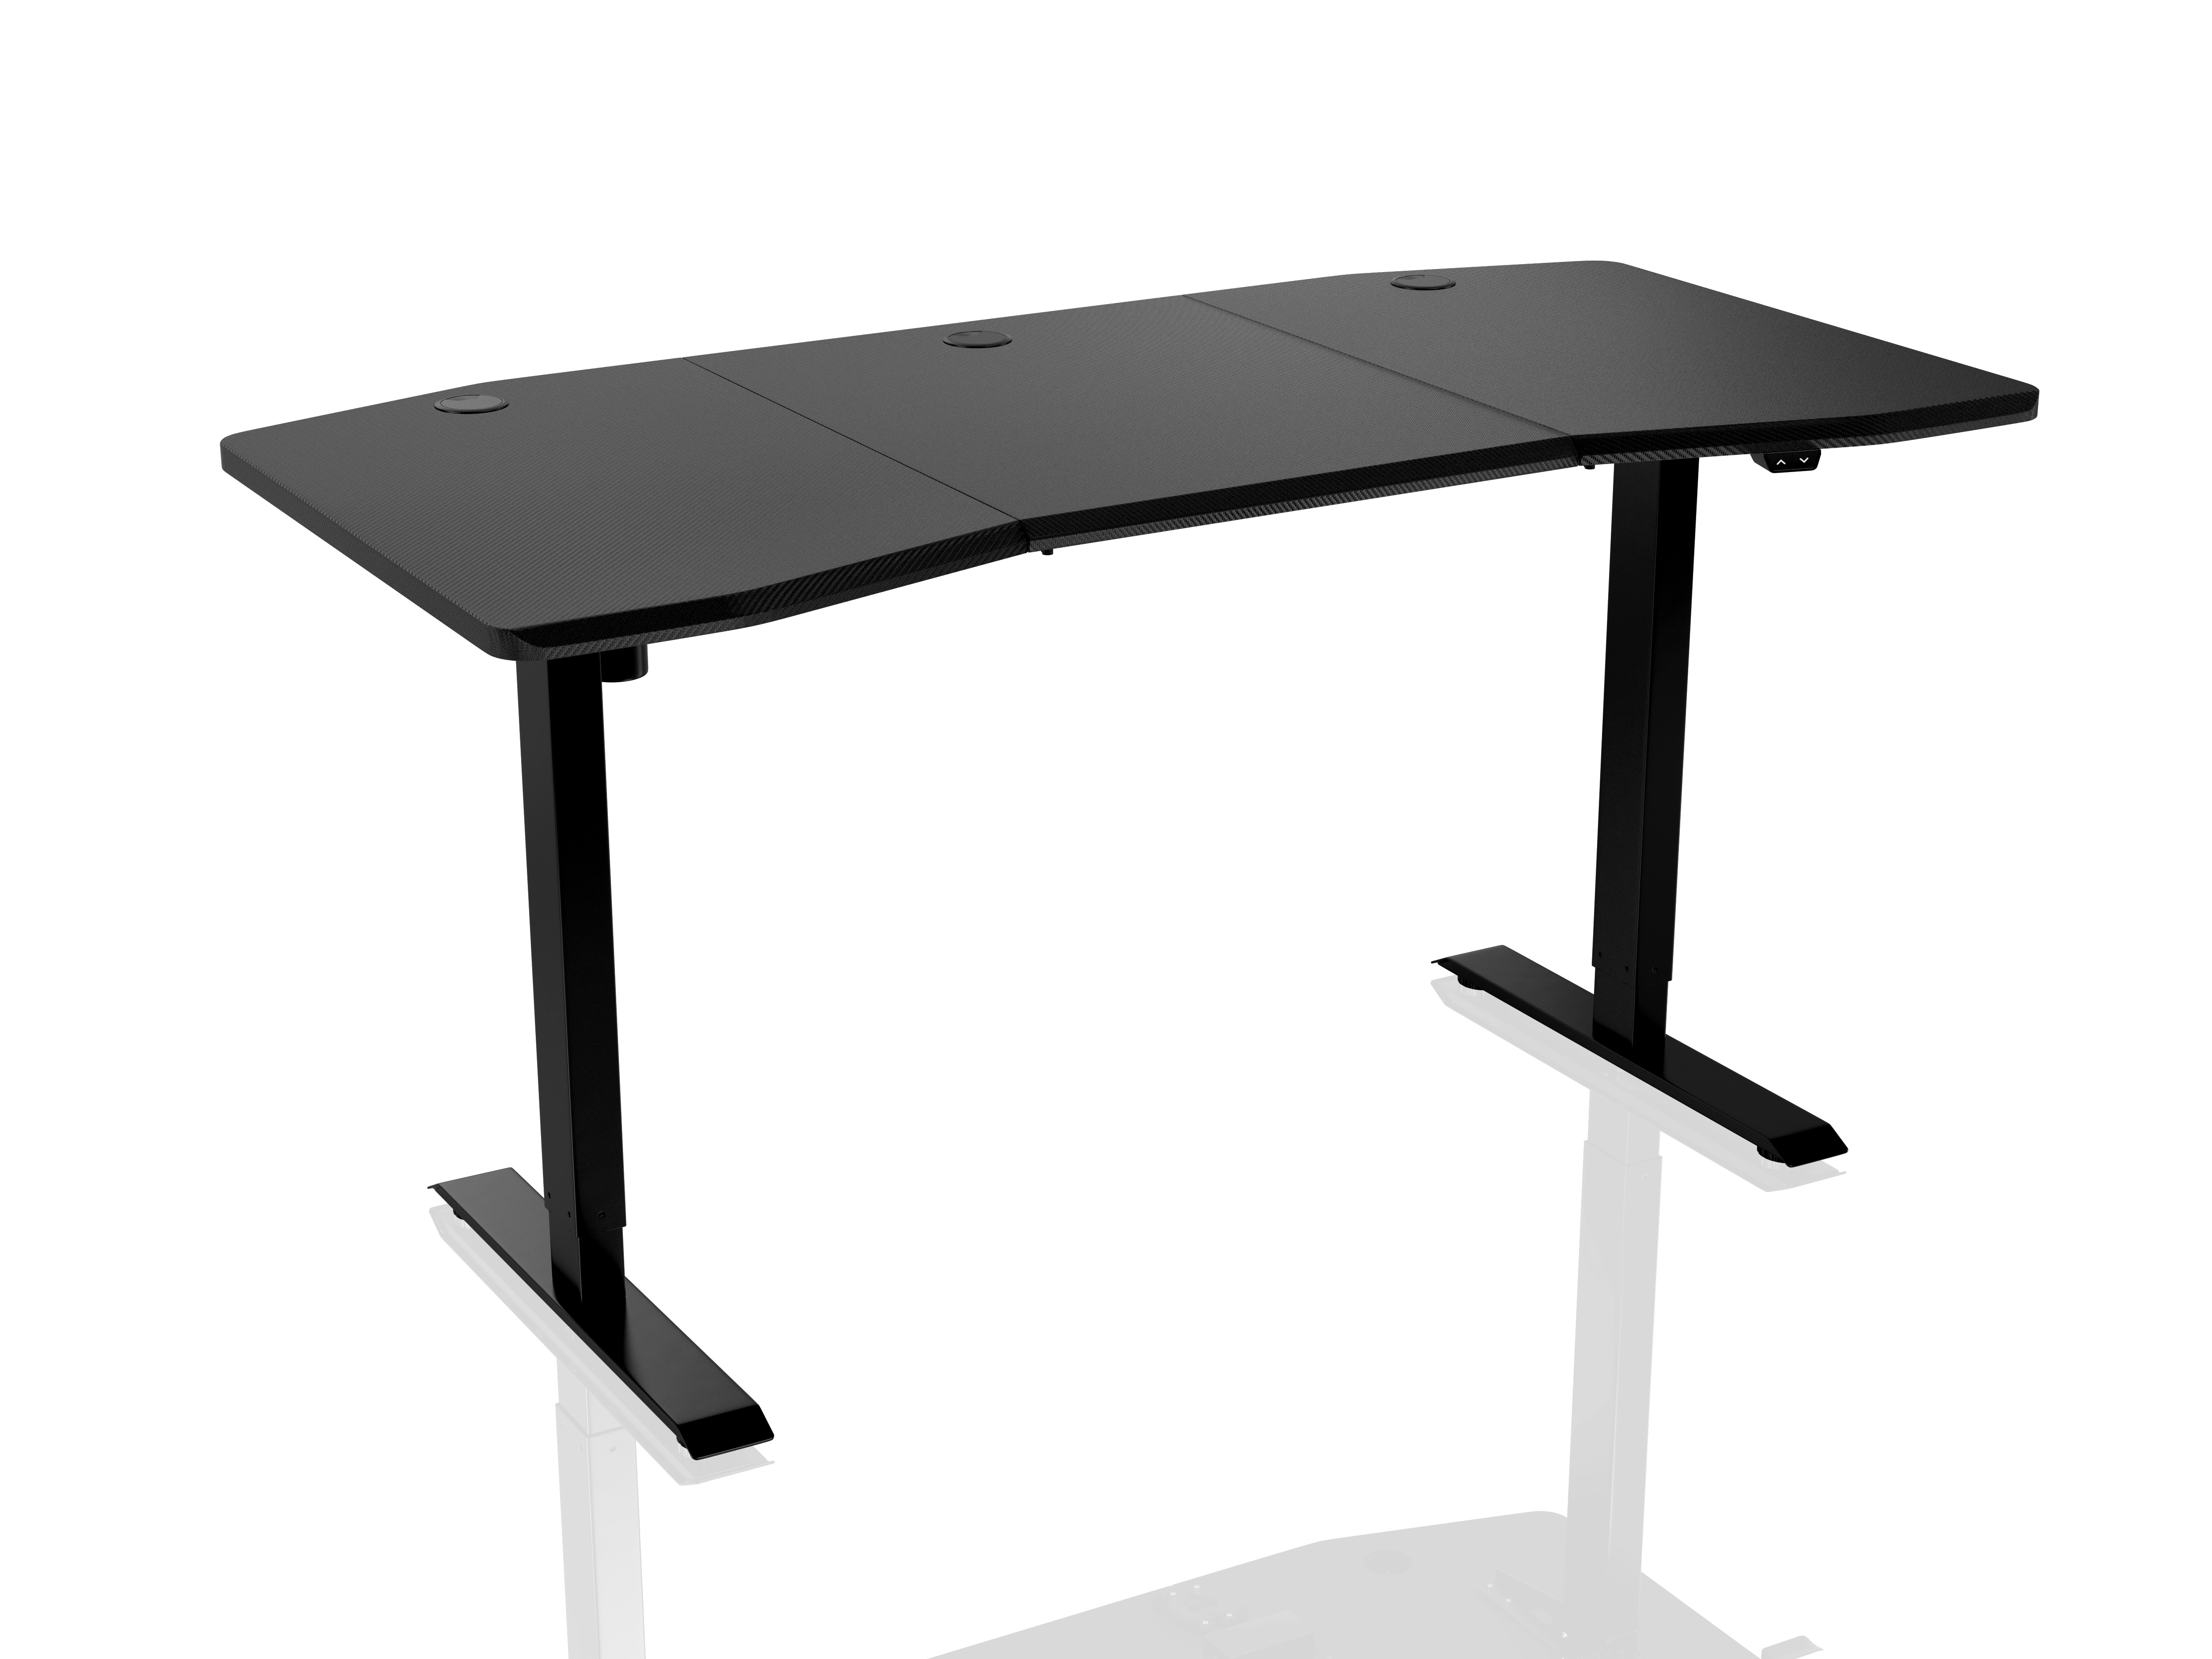 nitro-concepts - Gaming Desk D16E Carbon Red - electrically adjustable height